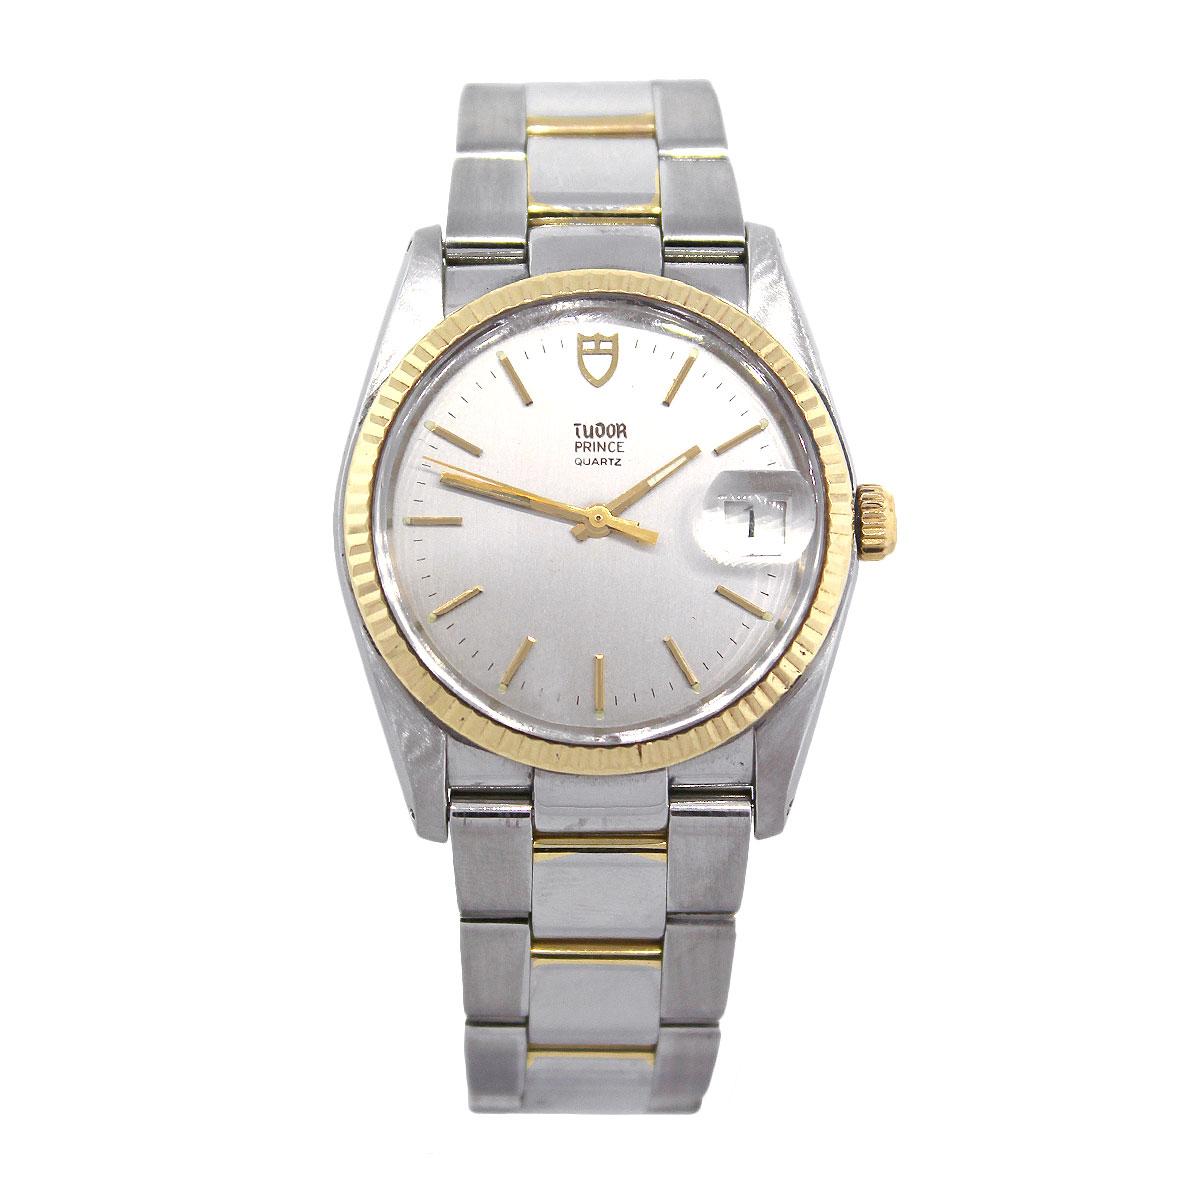 Brand: Tudor
MPN: 91533
Model: Oysterdate
Case Material: Stainless Steel
Case Diameter: 34mm
Crystal: Plastic
Bezel: 18k yellow gold fluted bezel
Dial: Silver dial with yellow hold sticks and hands. Date can be found at 3 O’clock
Bracelet: Stainless